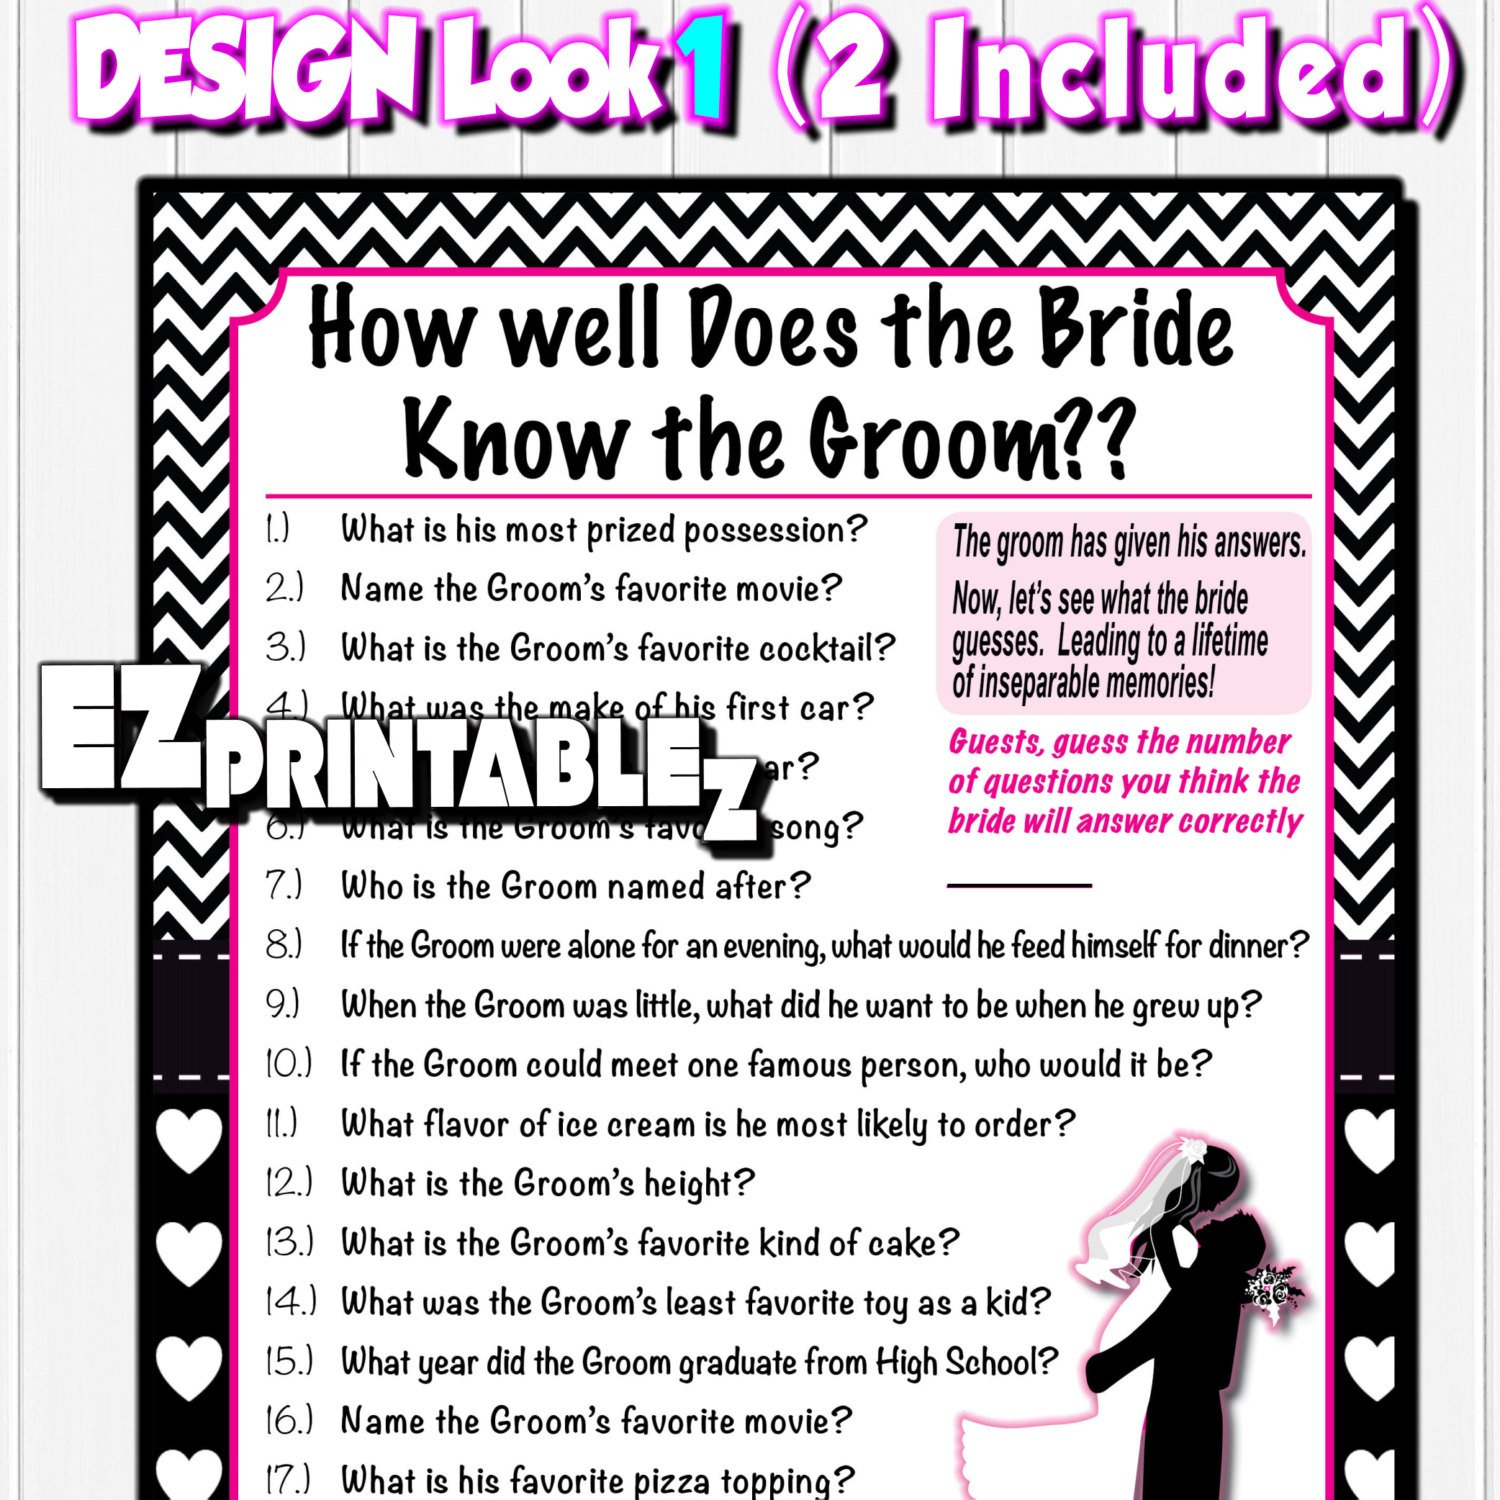 Printable Bridal Shower Game How Well Does The Bride Know The Groom - How Well Does The Bride Know The Groom Free Printable